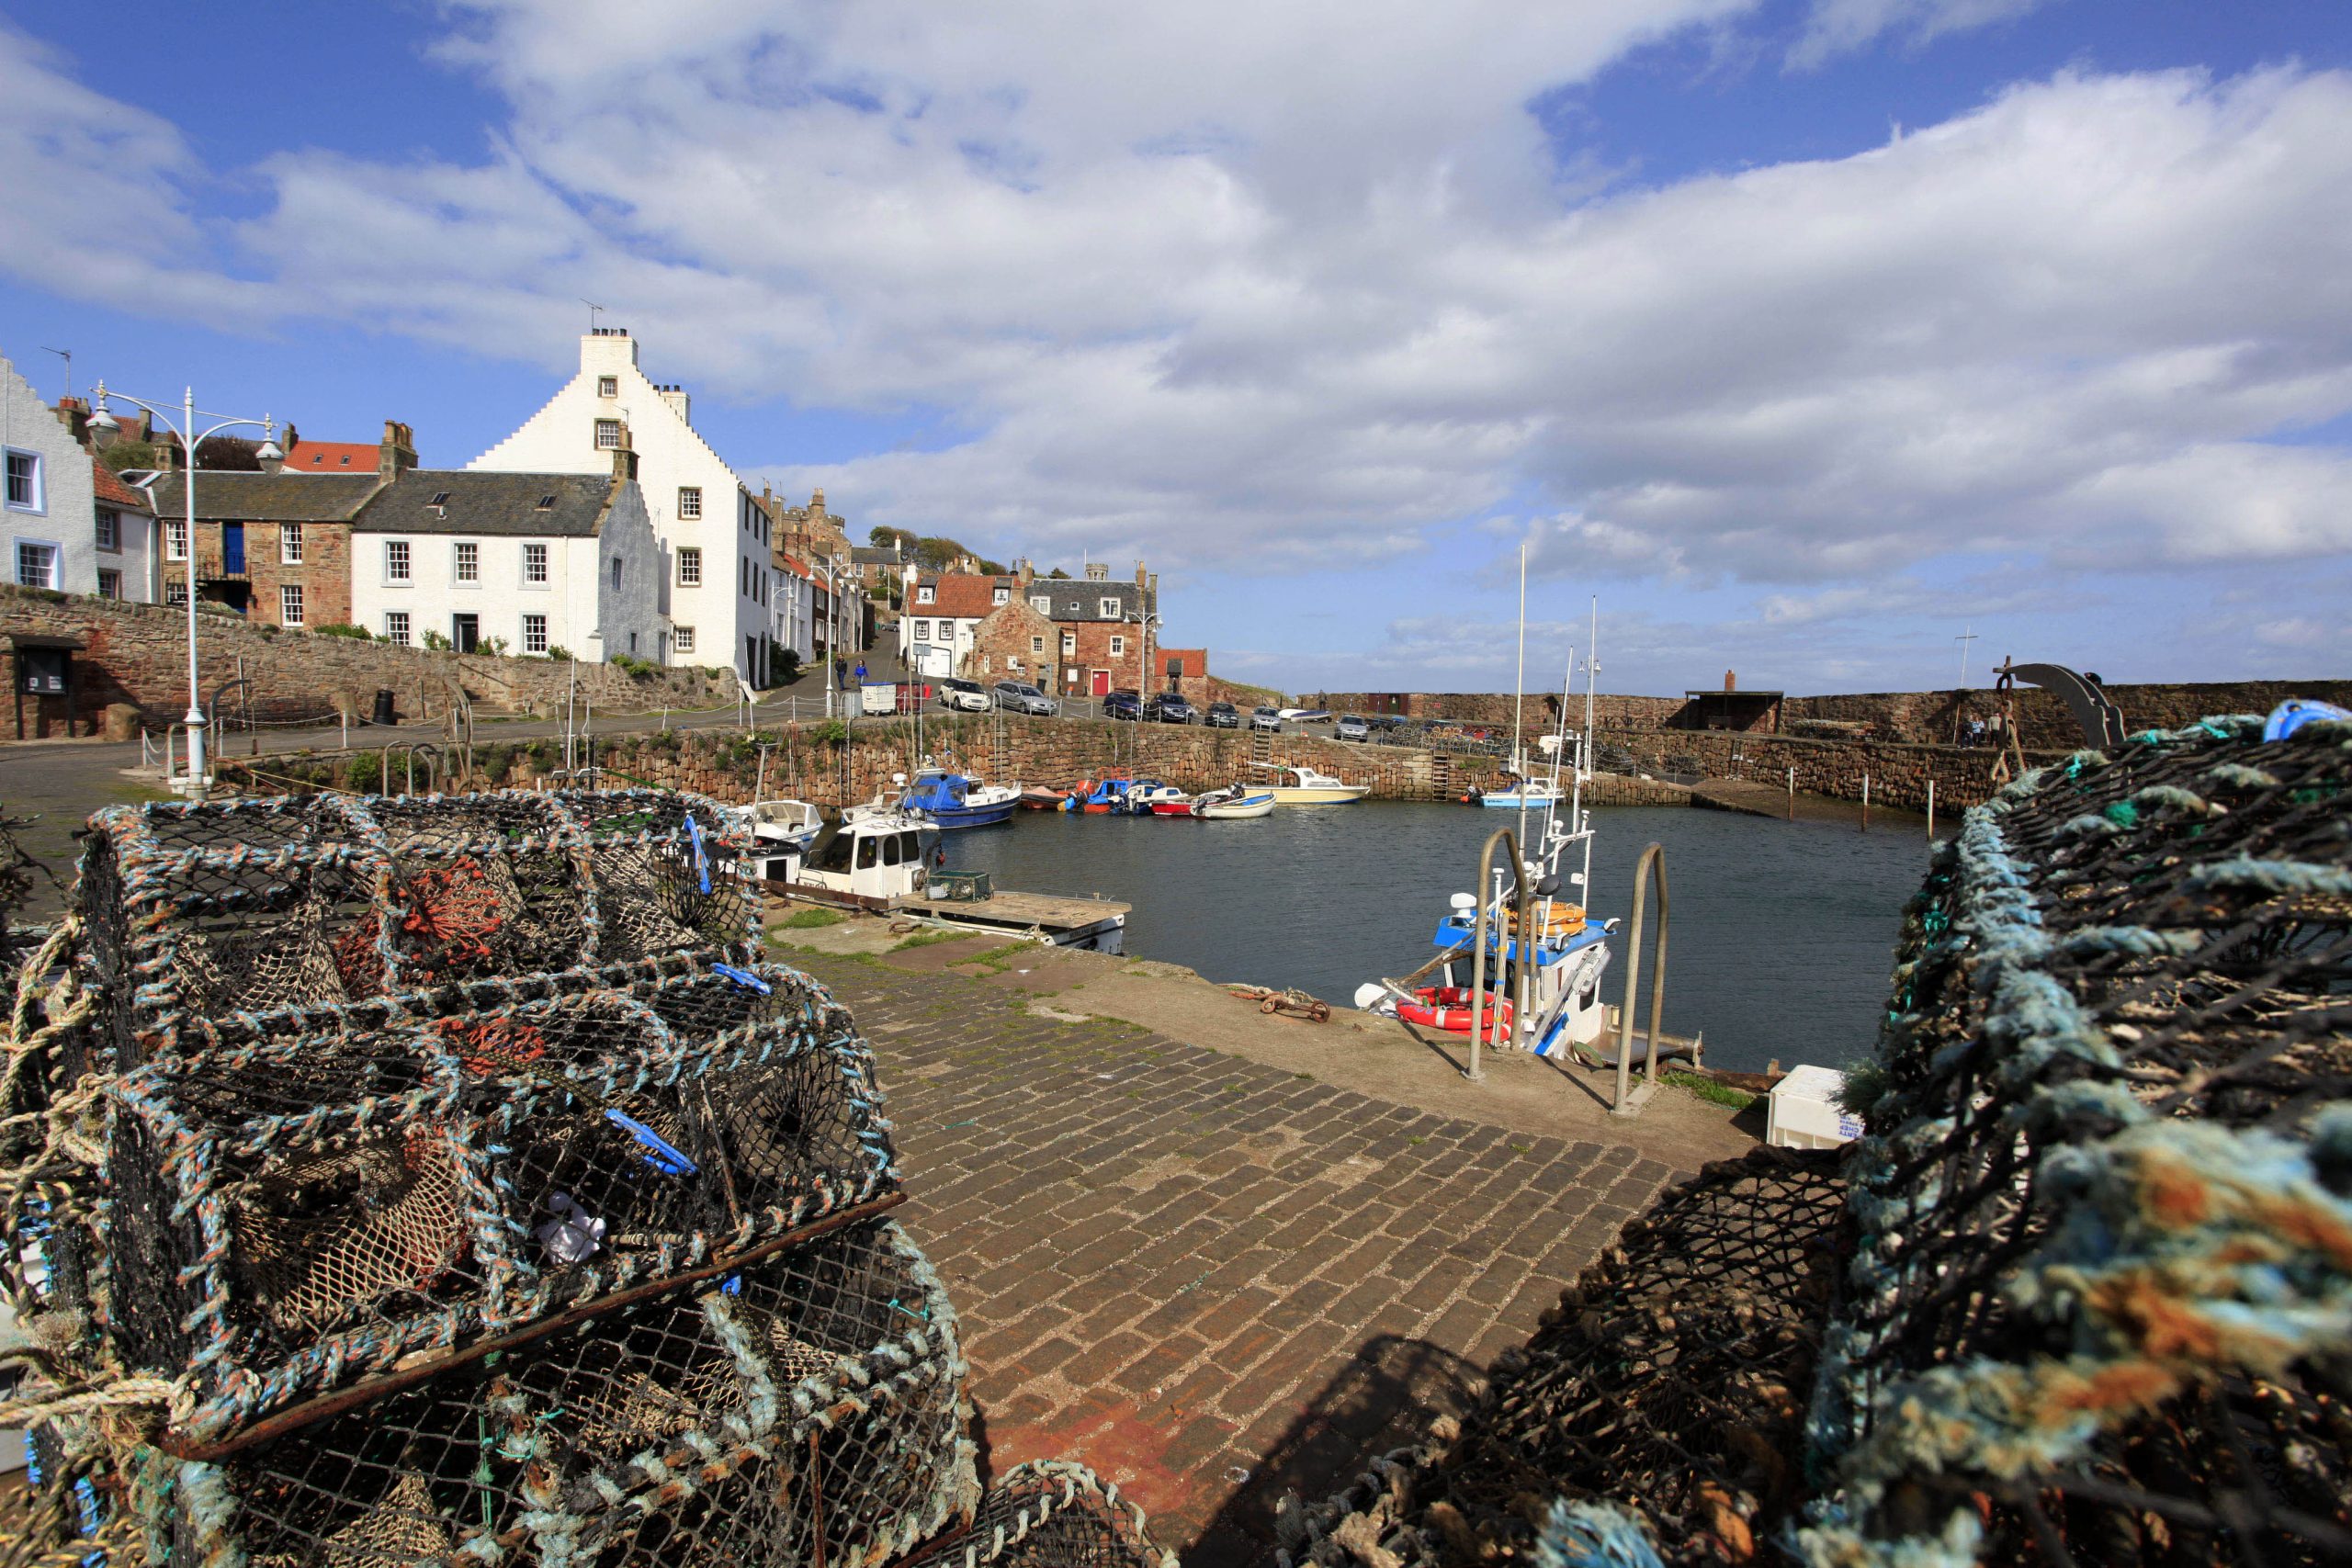 The harbour at Crail, in the East Neuk of Fife